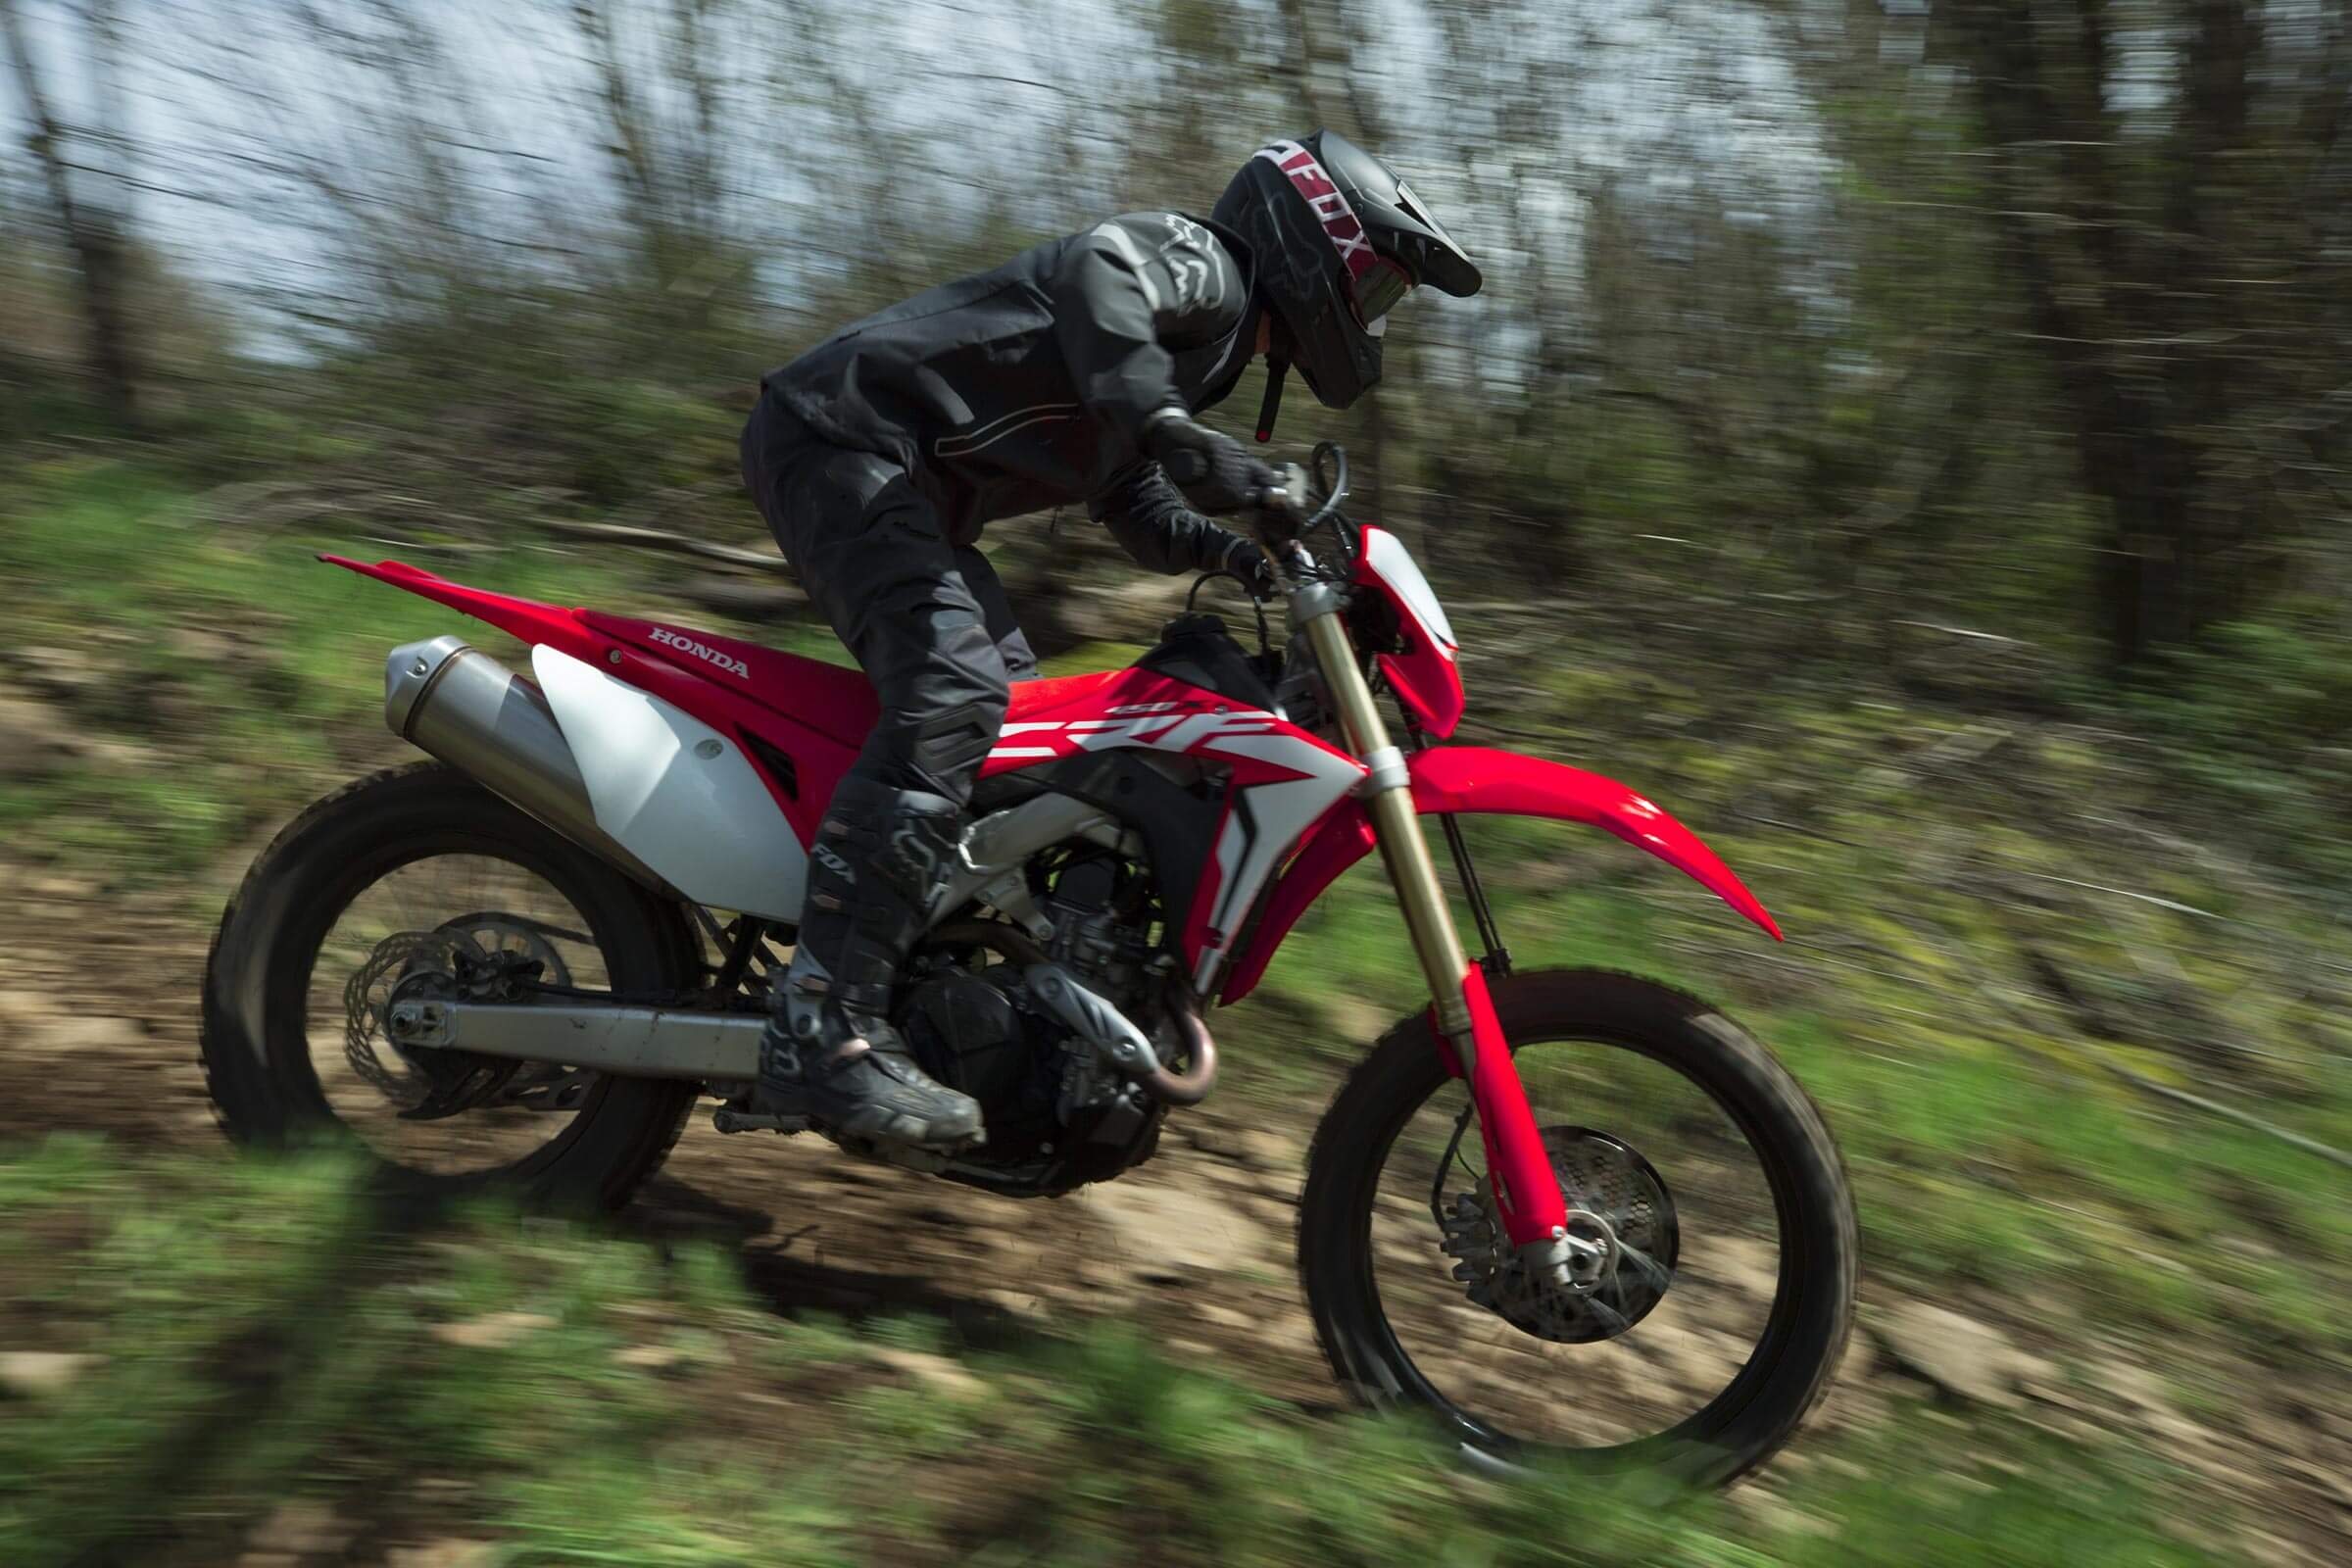 Red-and-white 2019 Honda CRF450X being ridden quickly down a forest trail